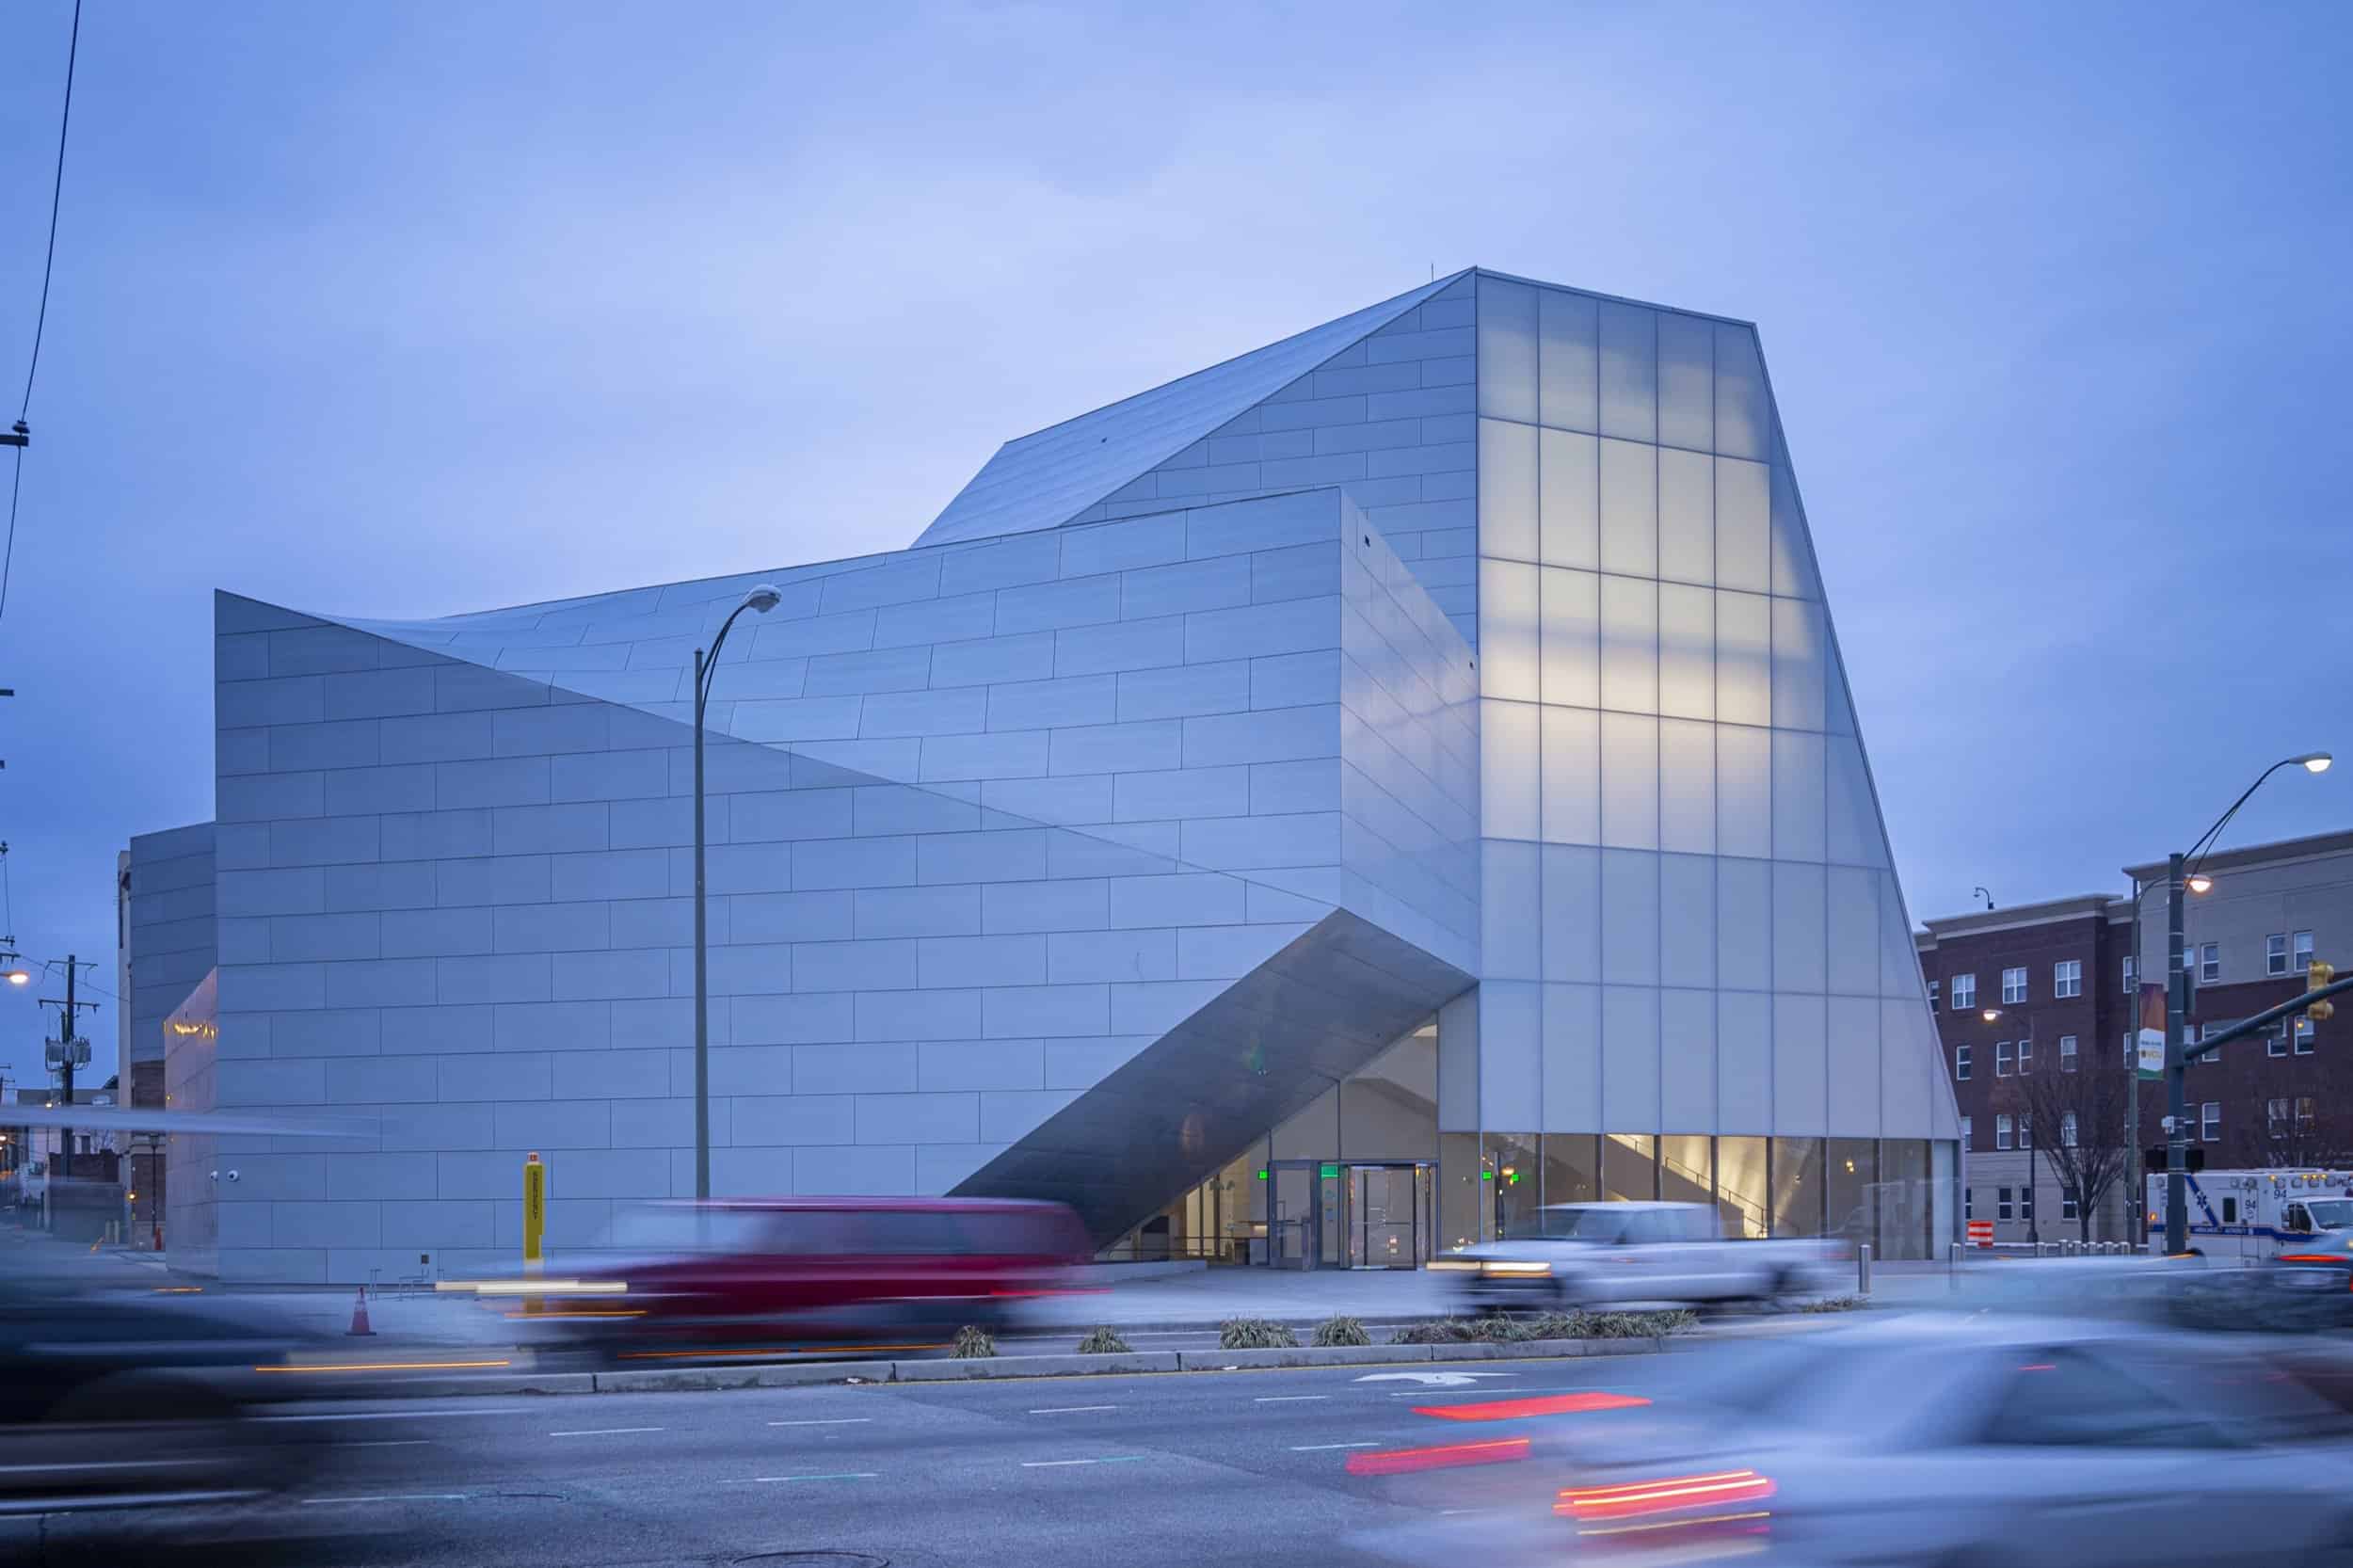 Institute for Contemporary Art at VCU, designed by Steven Holl Architects, features a zinc facade.